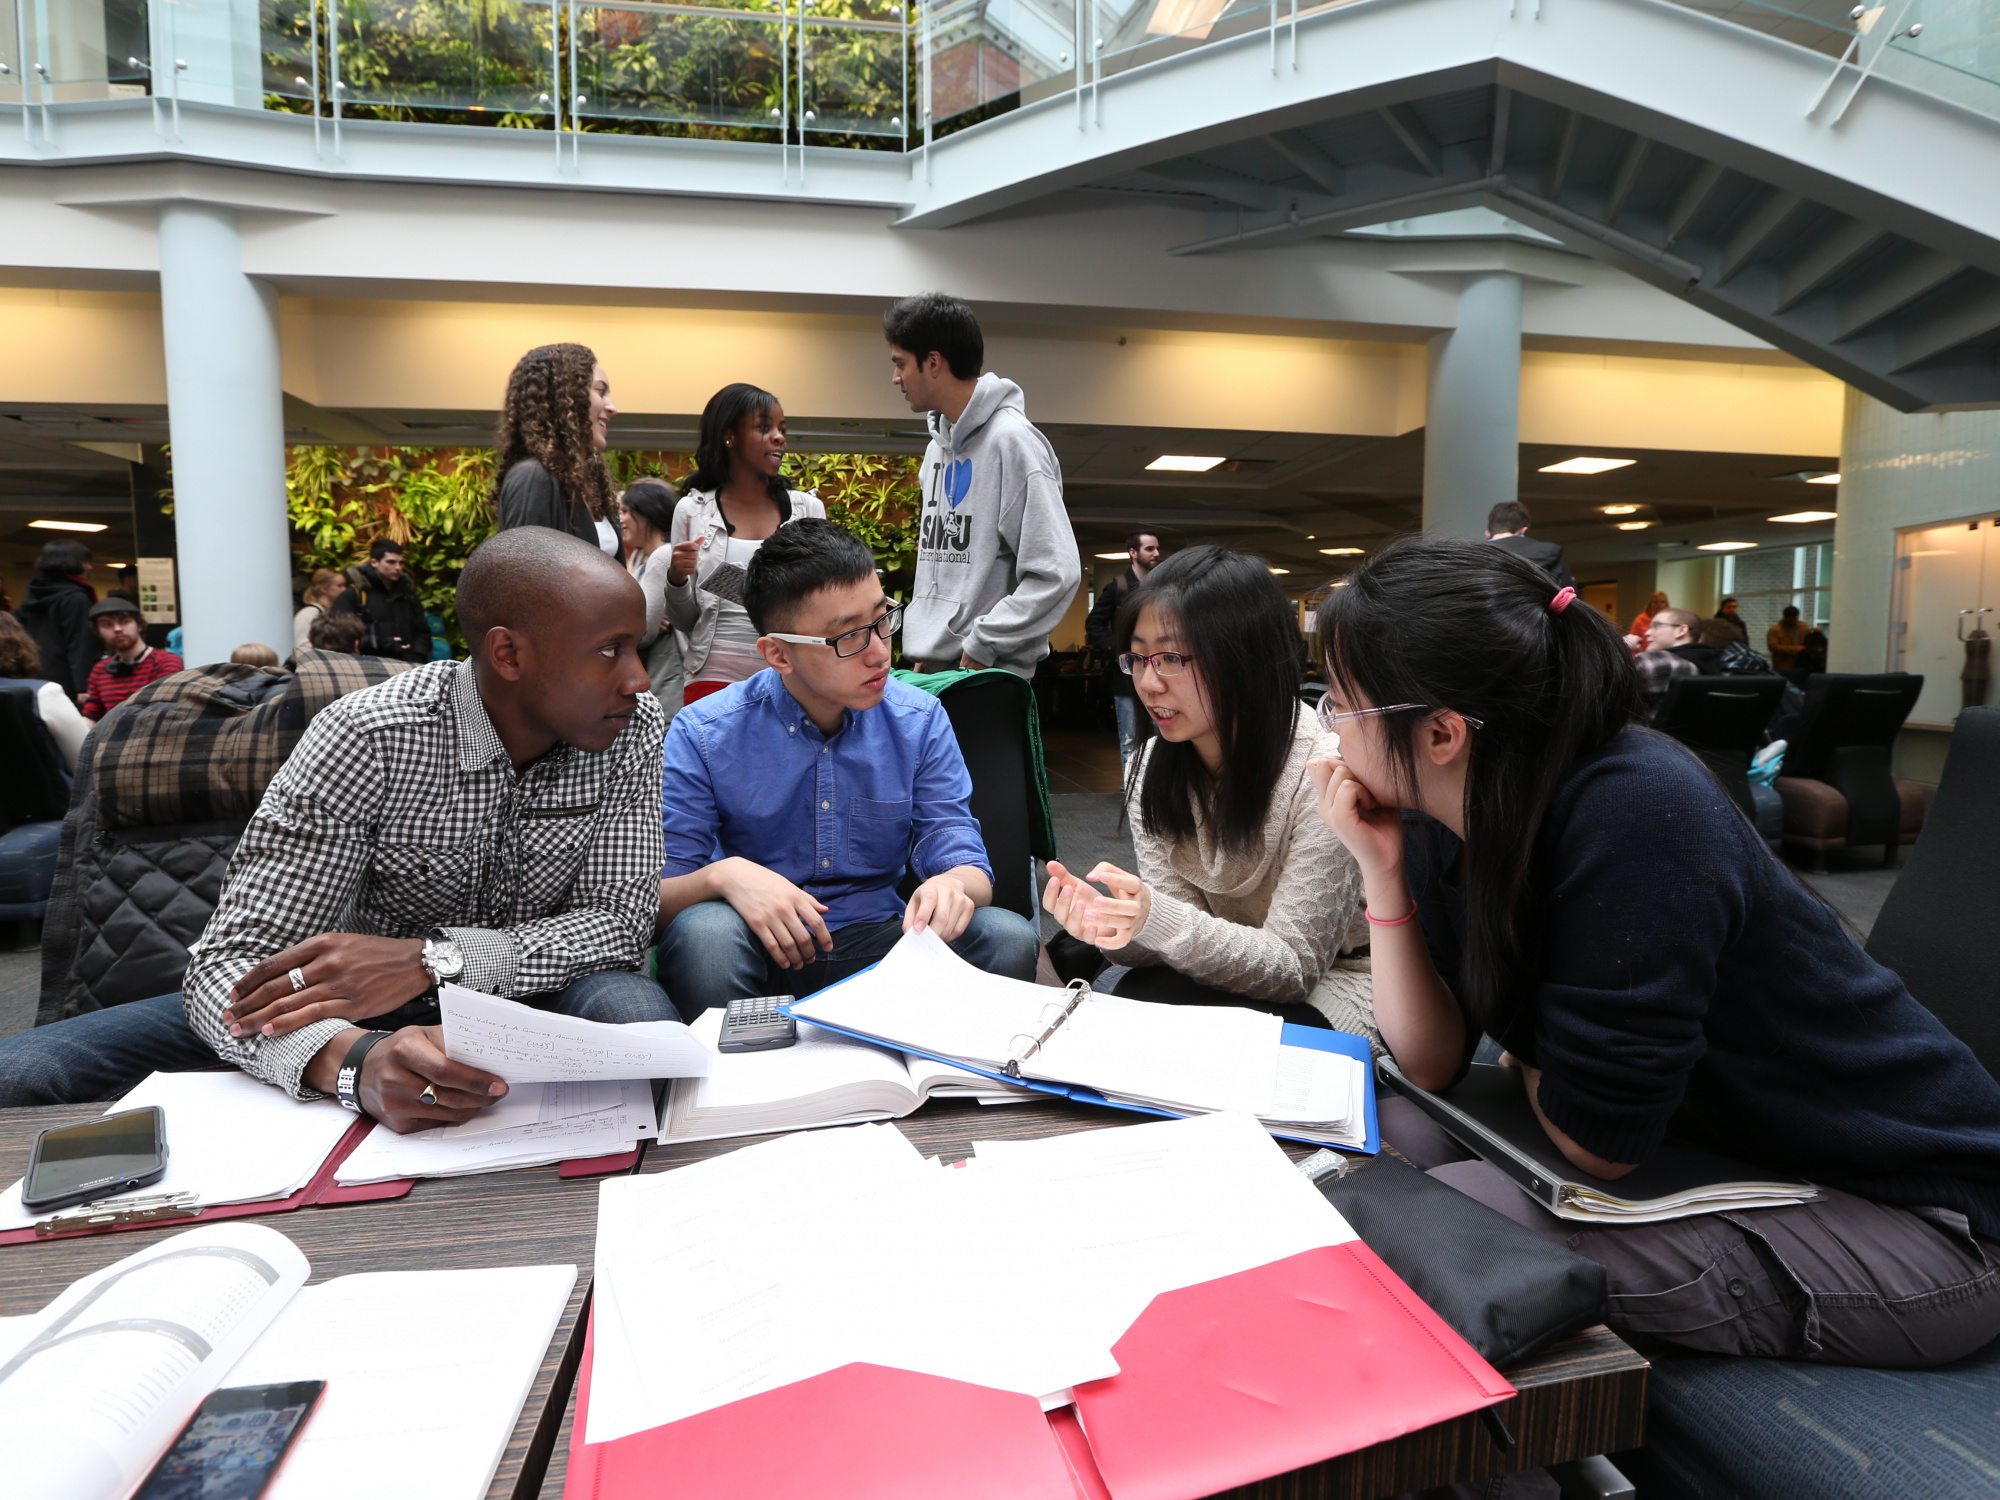 Photo of four students engaged in conversation around a table containing papers and folders